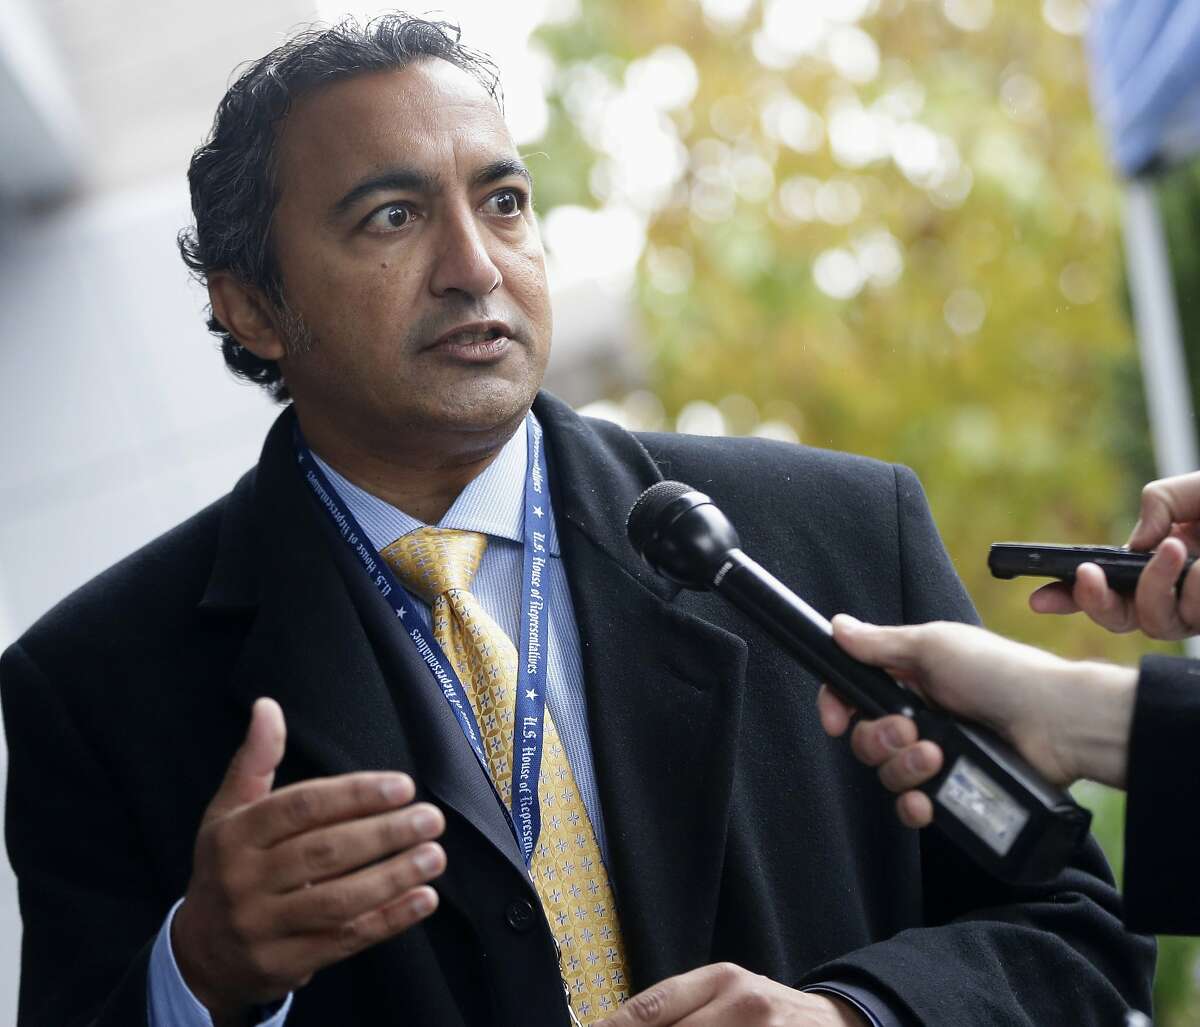 FILE - In this Nov. 13, 2012 file photo, then-Rep.-elect Ami Bera, D-Calif., speaks to reporters after he registered for orientation at a hotel as newly-elected members of Congress arrived on Capitol Hill in Washington. Democratic Rep. Tulsi Gabbard, of Hawaii, is the first Hindu elected to Congress. Bera, also a Democrat, is the third Indian-American to serve in the House. Gabbard, however, isn't from India, where Hinduism originated and the background shared by the vast majority of its adherents have ethnic ties. (AP Photo/Charles Dharapak, File)